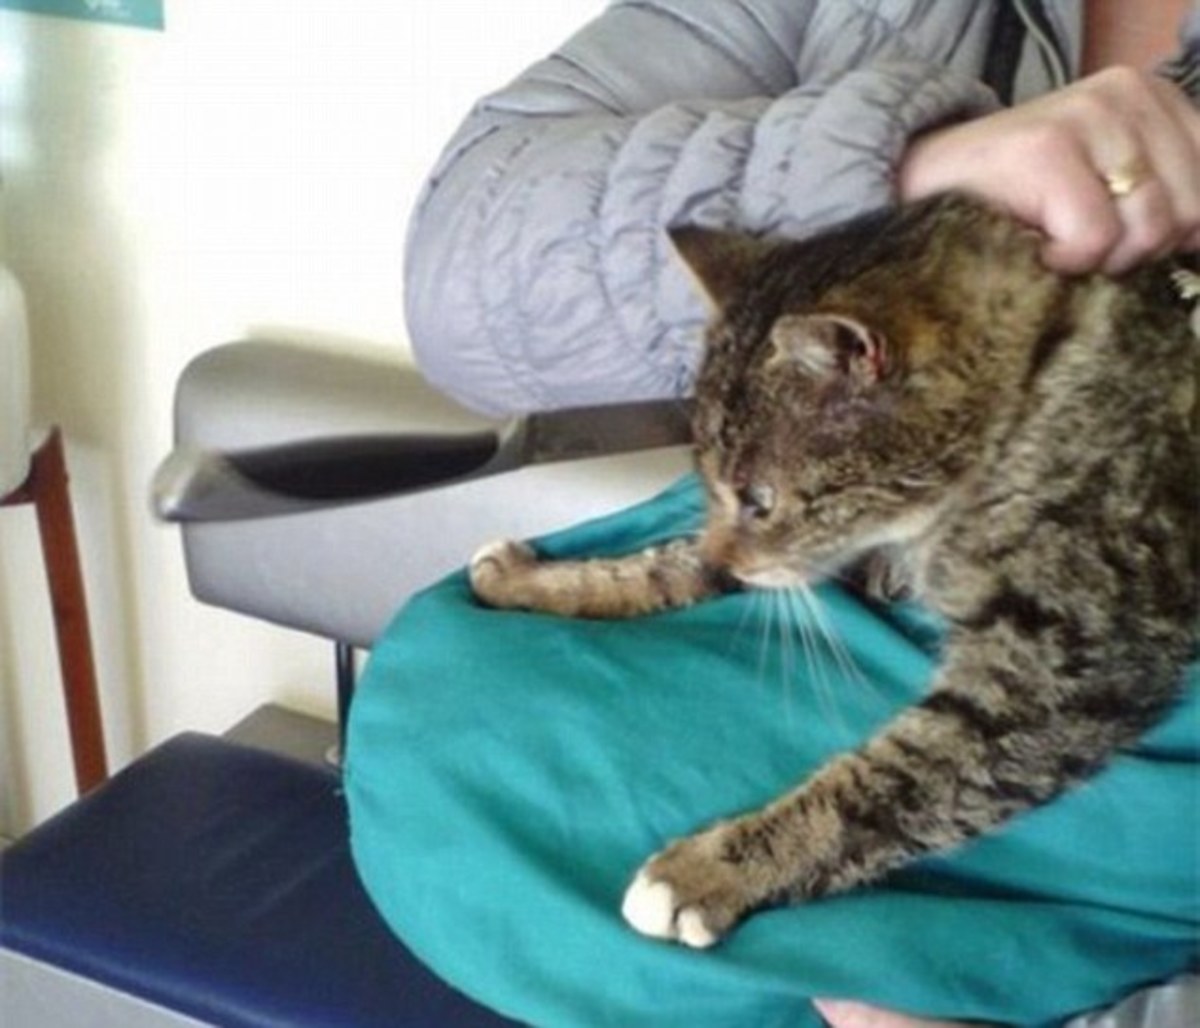 Woman Stumbles Upon Cat With Blade Sticking Out Of Its Head Opposing